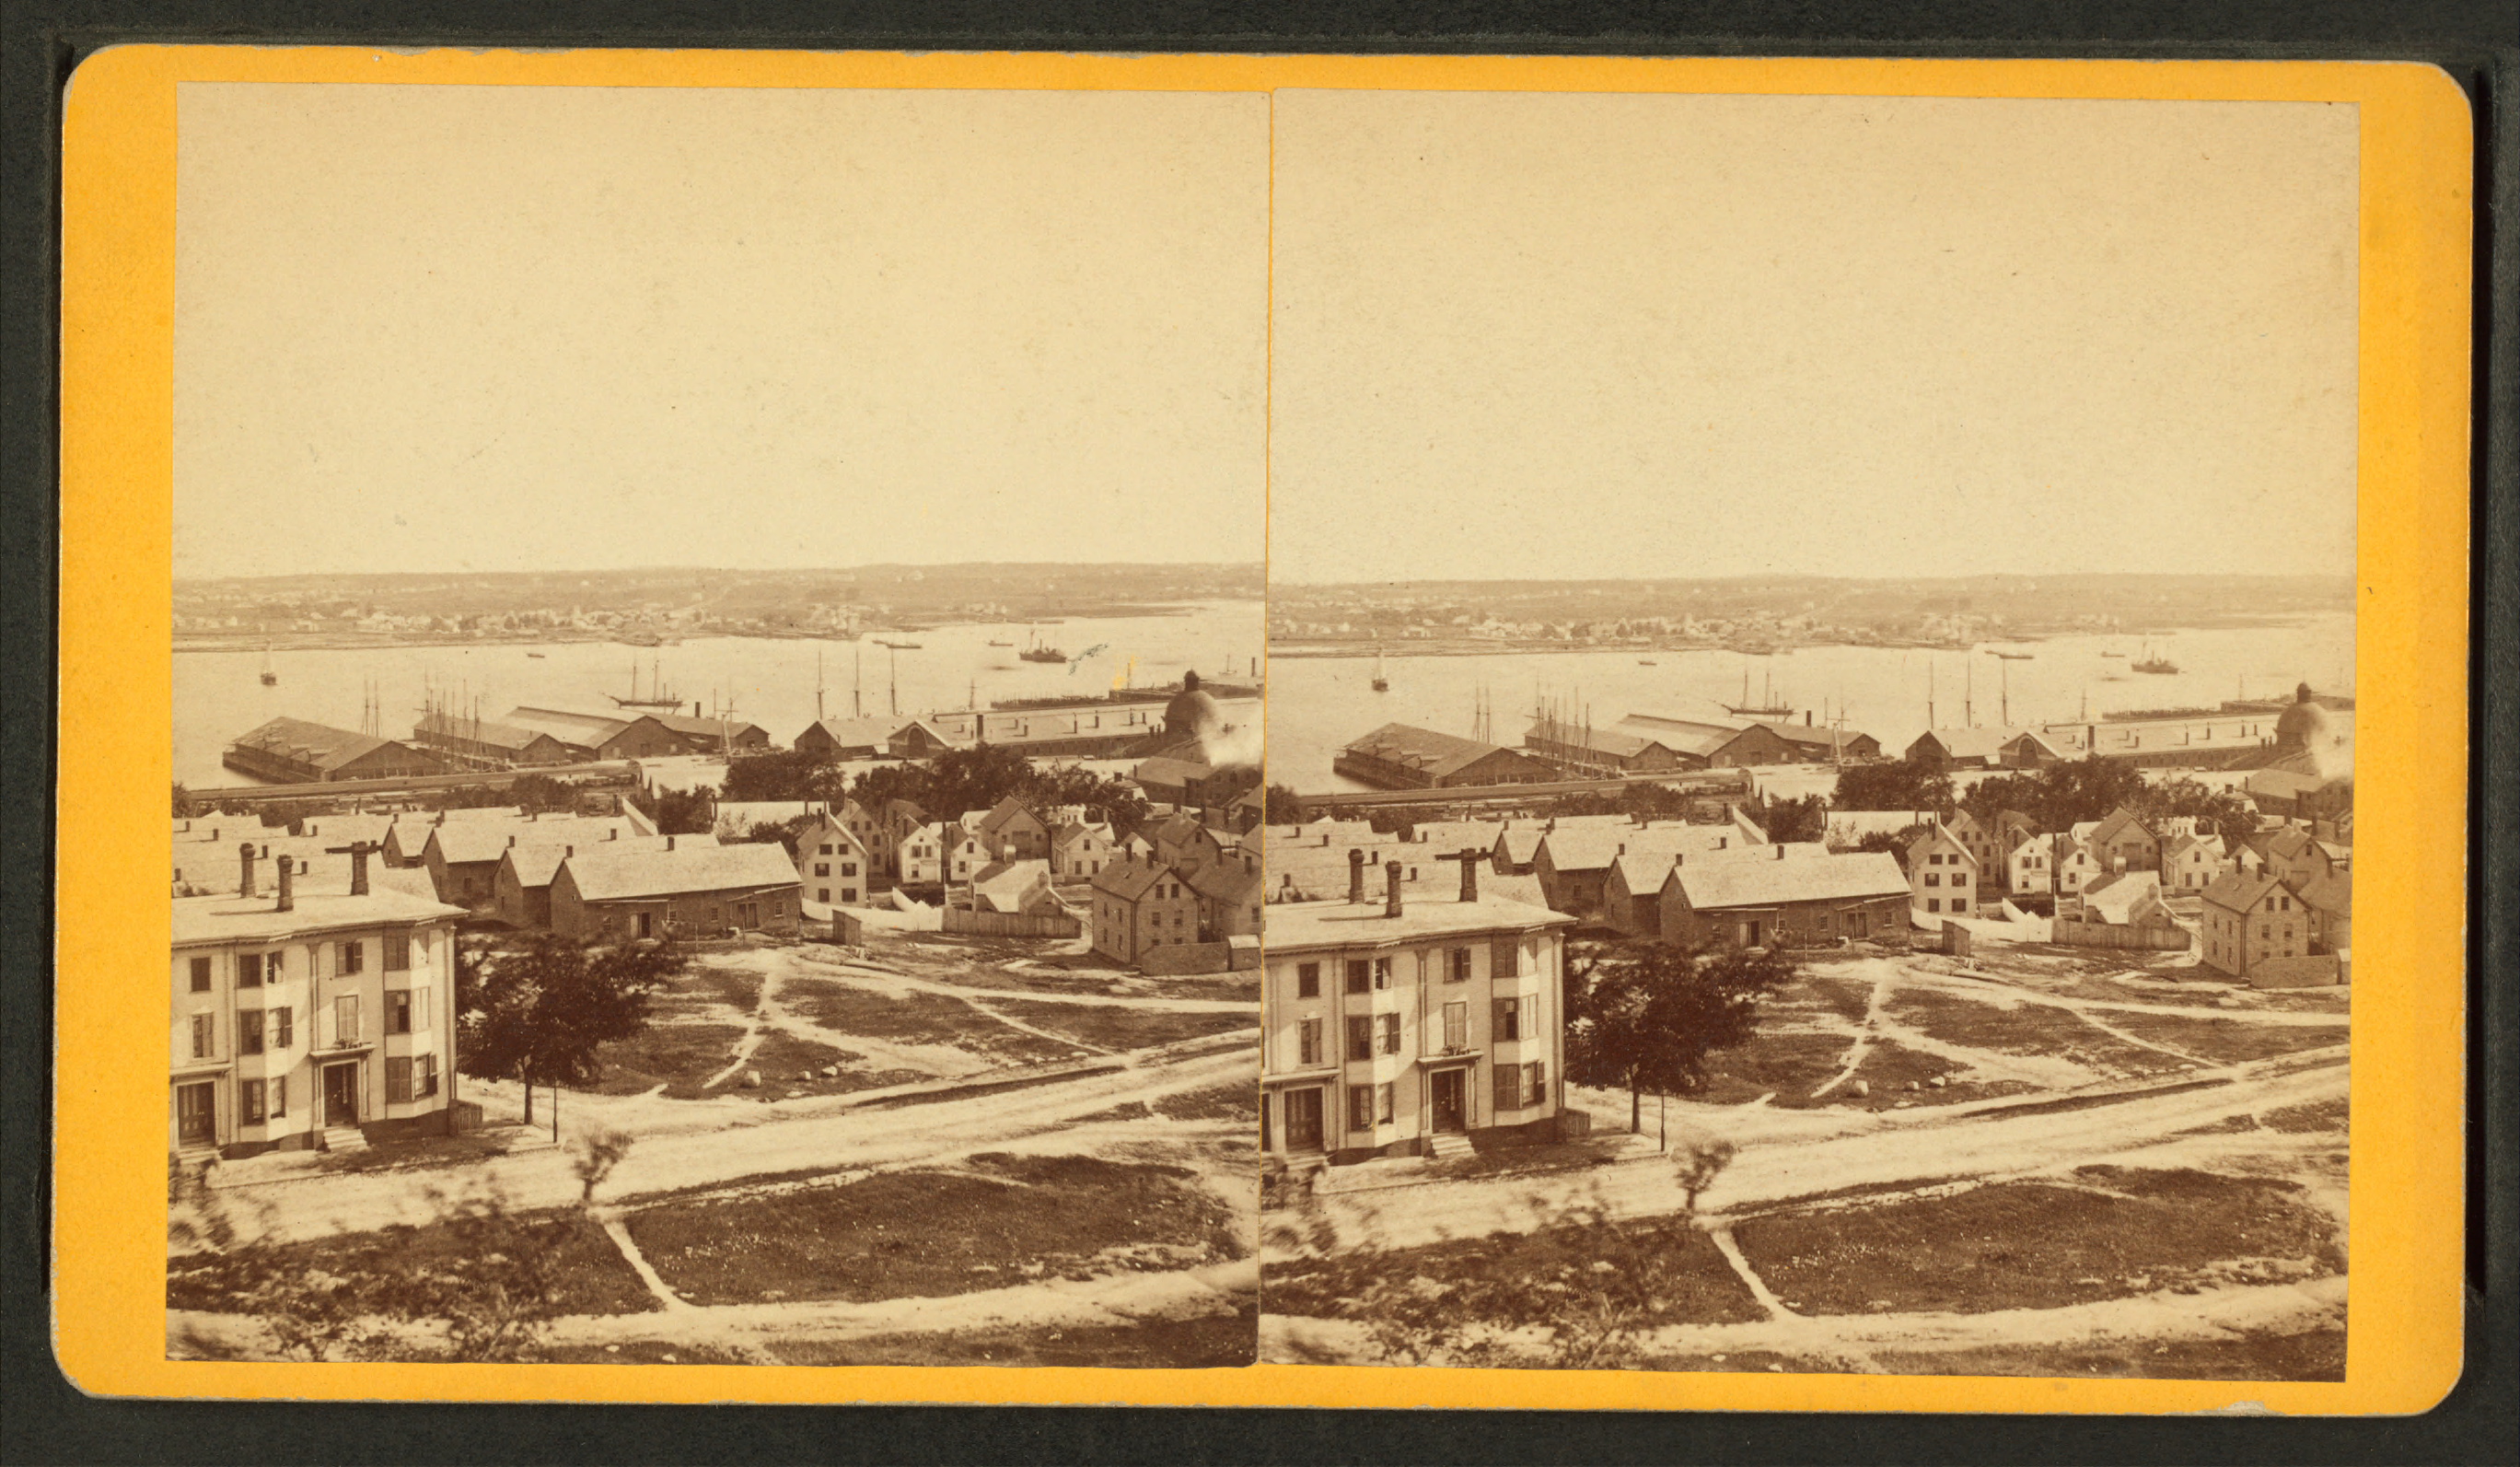 Portland Harbor, Maine, looking south from Munjoy's Hill, from Robert N. Dennis collection of stereoscopic views